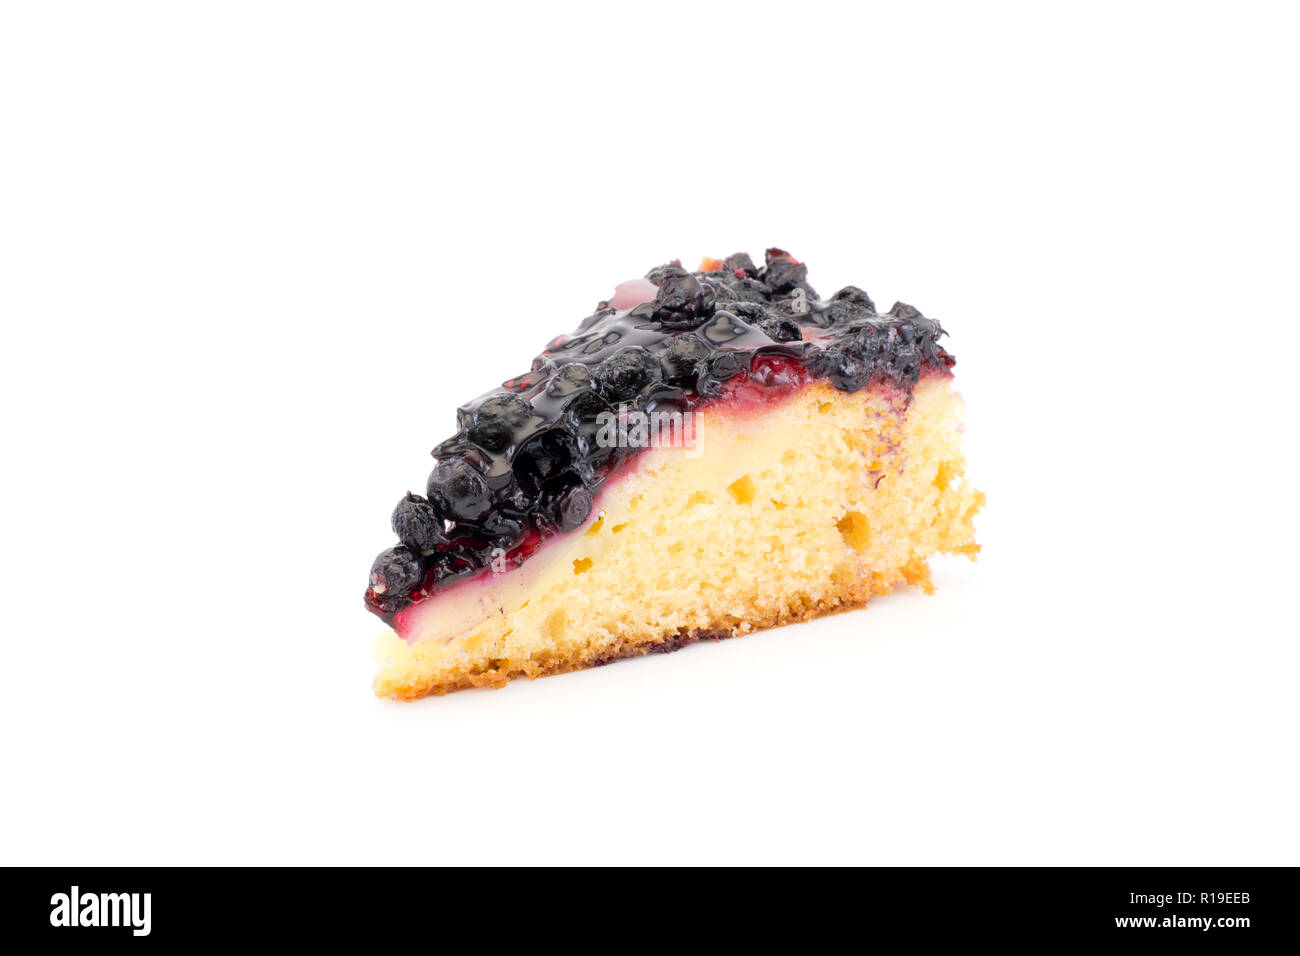 A piece of cake with fresh blueberries isolated on a white background Stock Photo